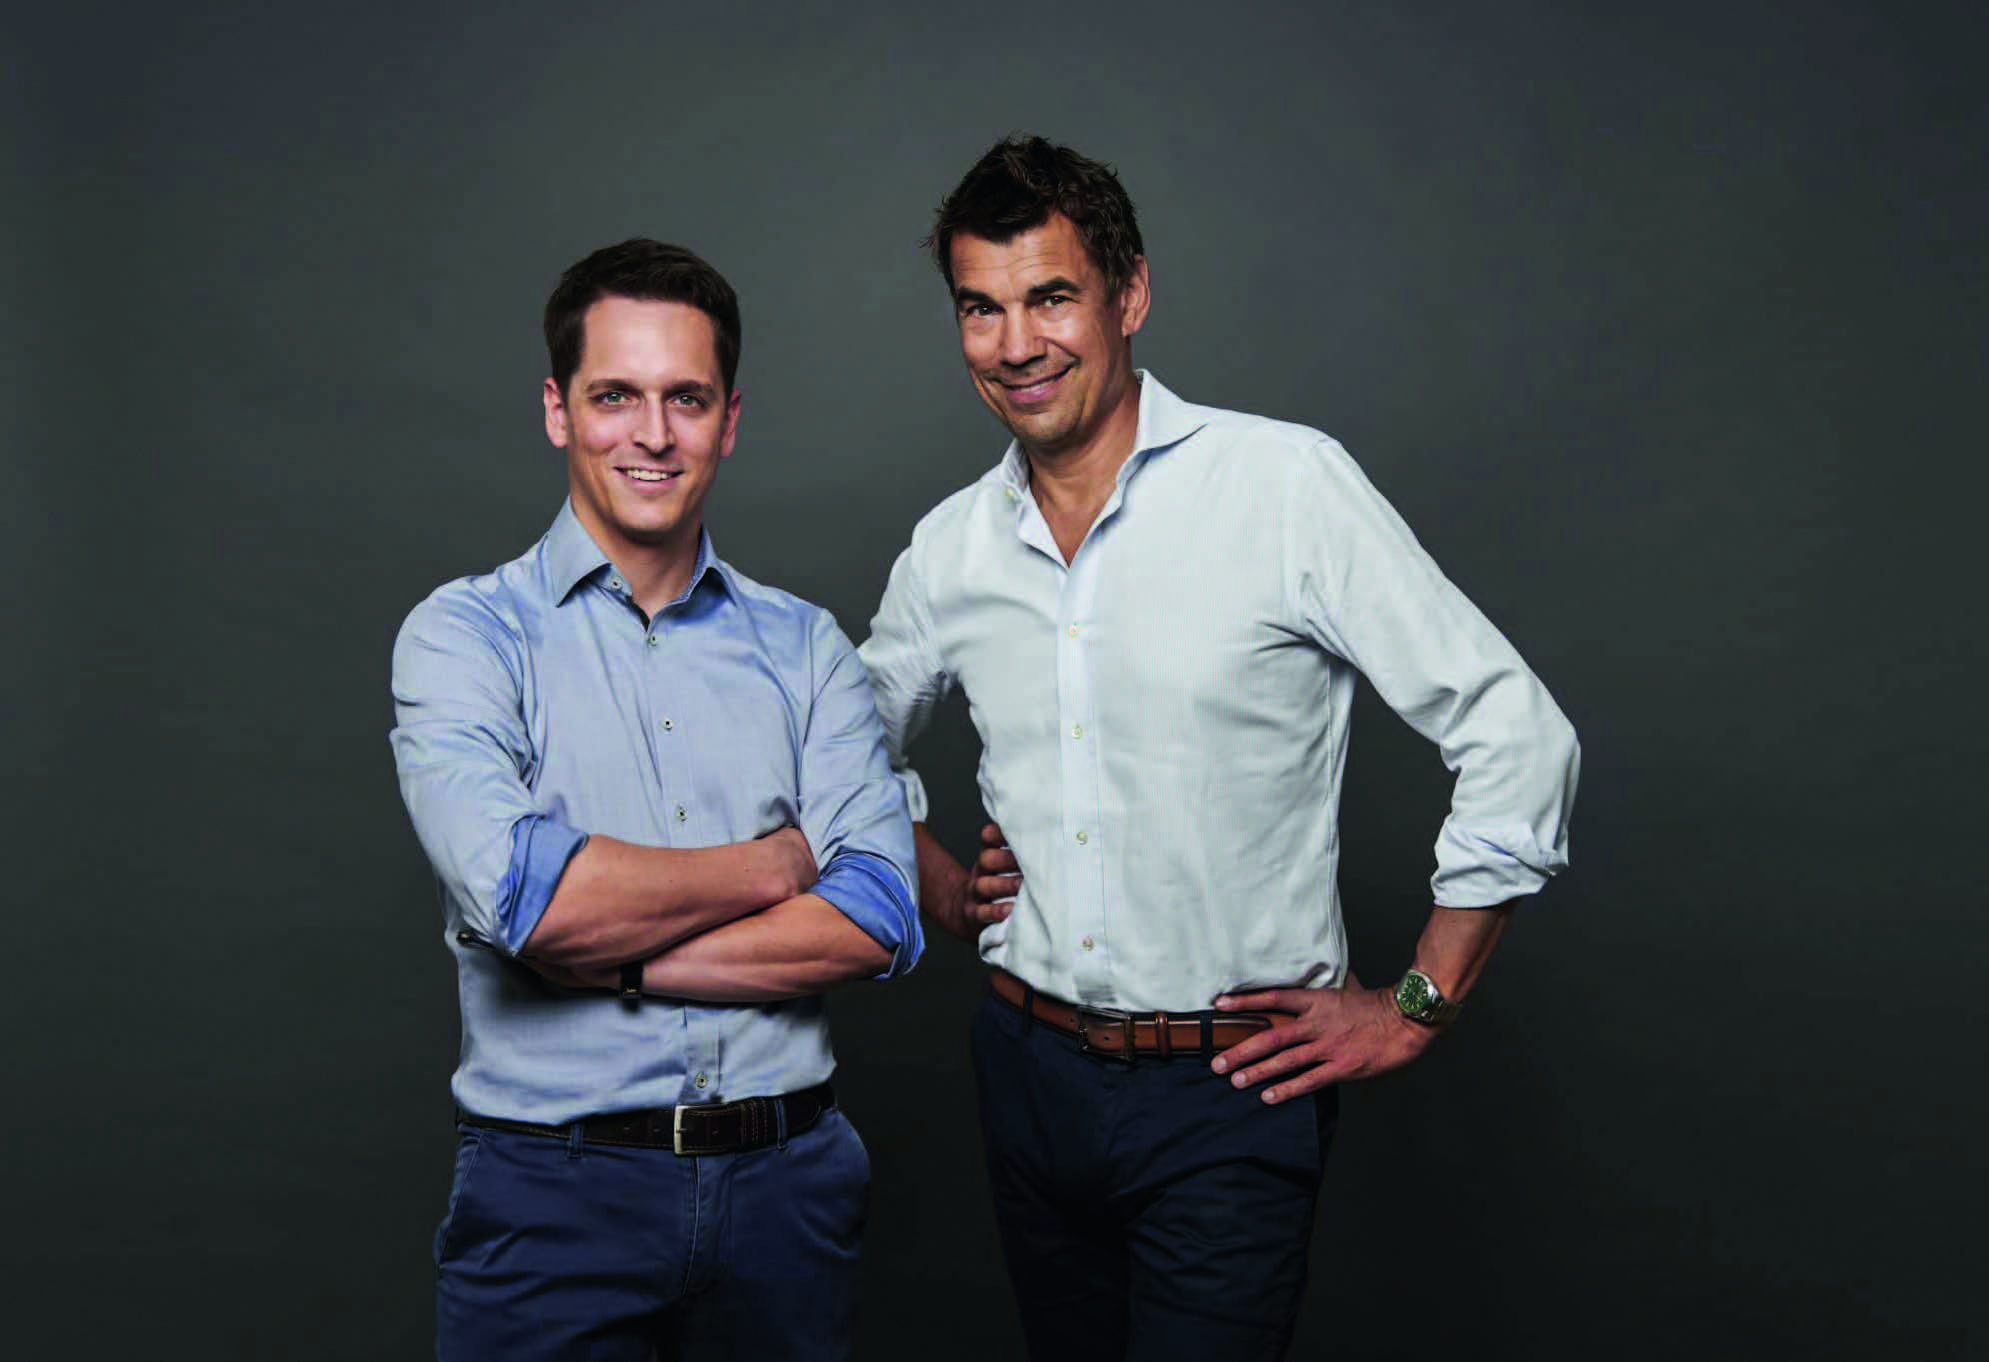 Dr Stefan Röhling and Prof. Michael Gahlert are experts in two-piece ceramic implants.